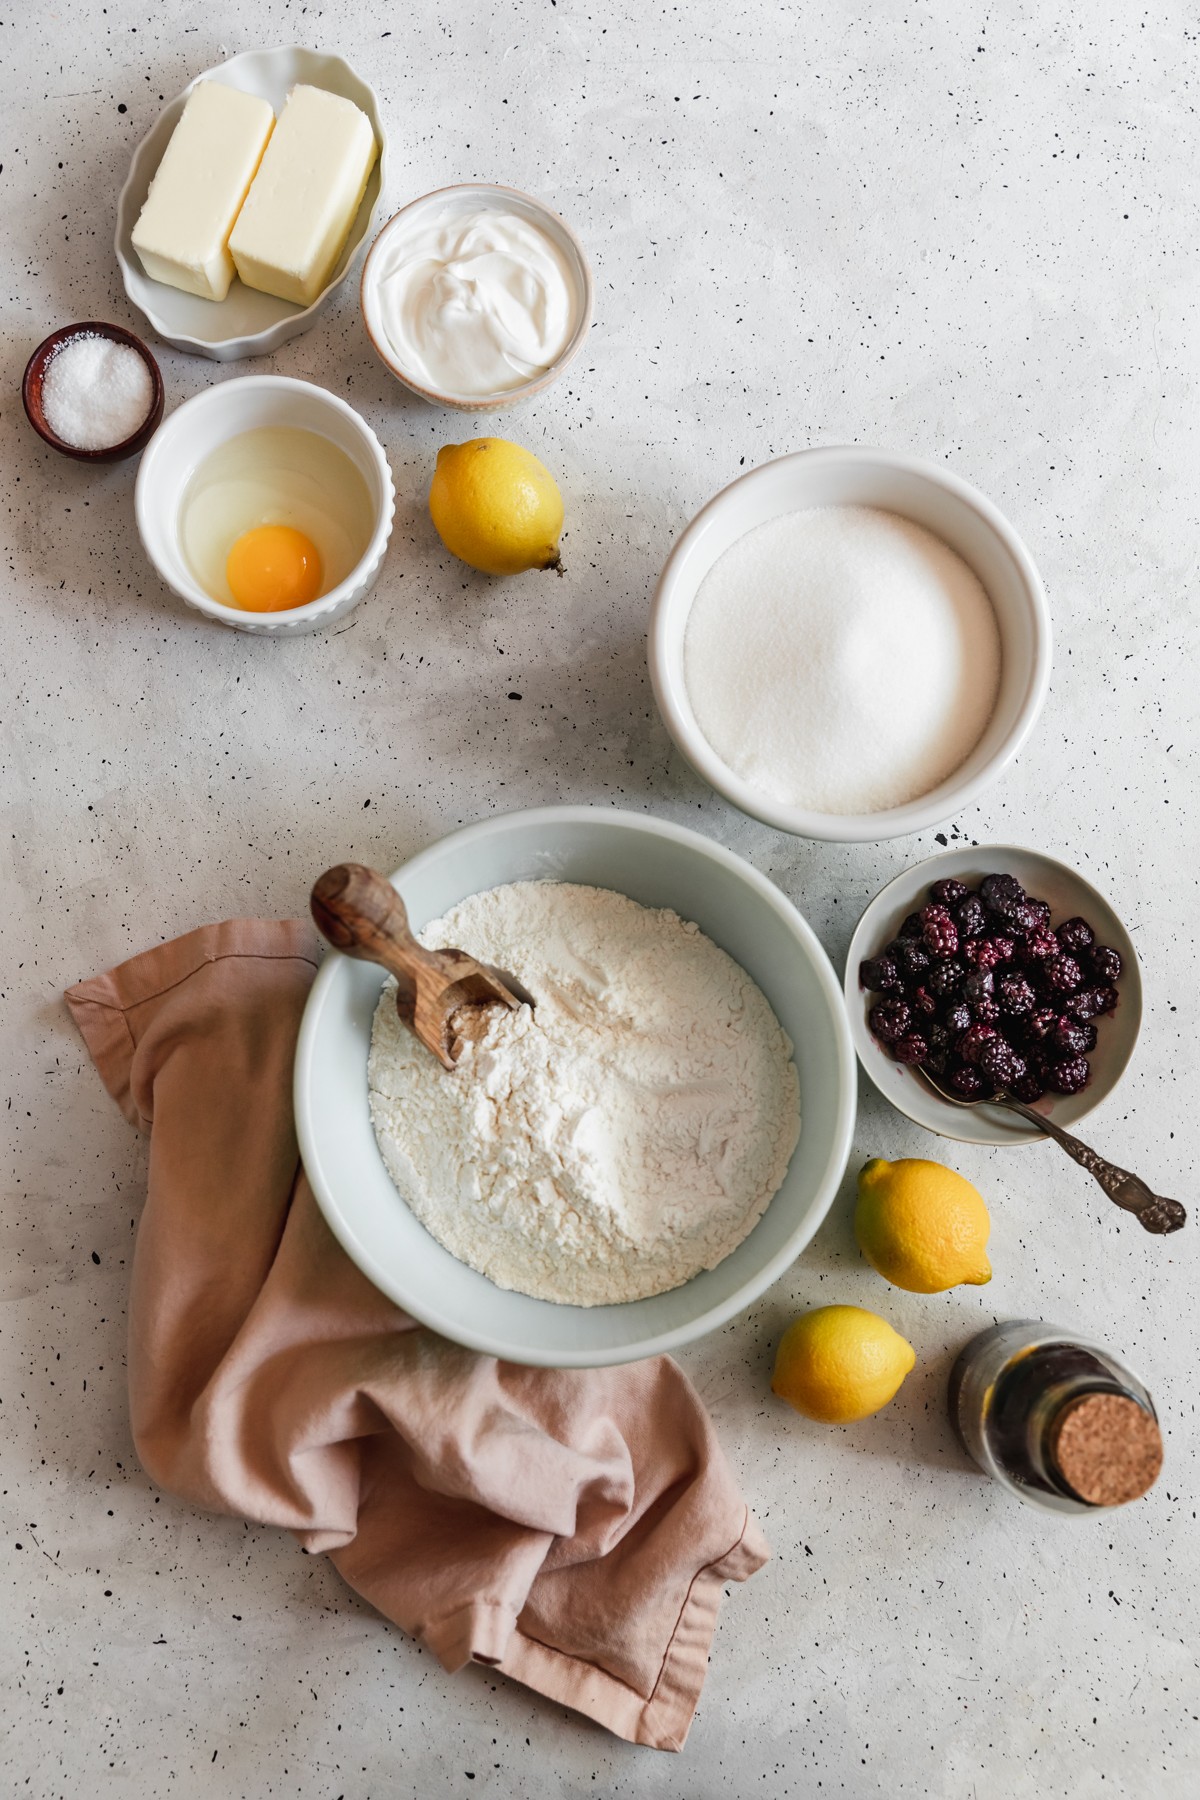 An overhead image of ingredients for sour cream lemon pound cake in various white and grey bowls on a white speckled table next to a bowl of blackberries, lemons, and a pink linen.